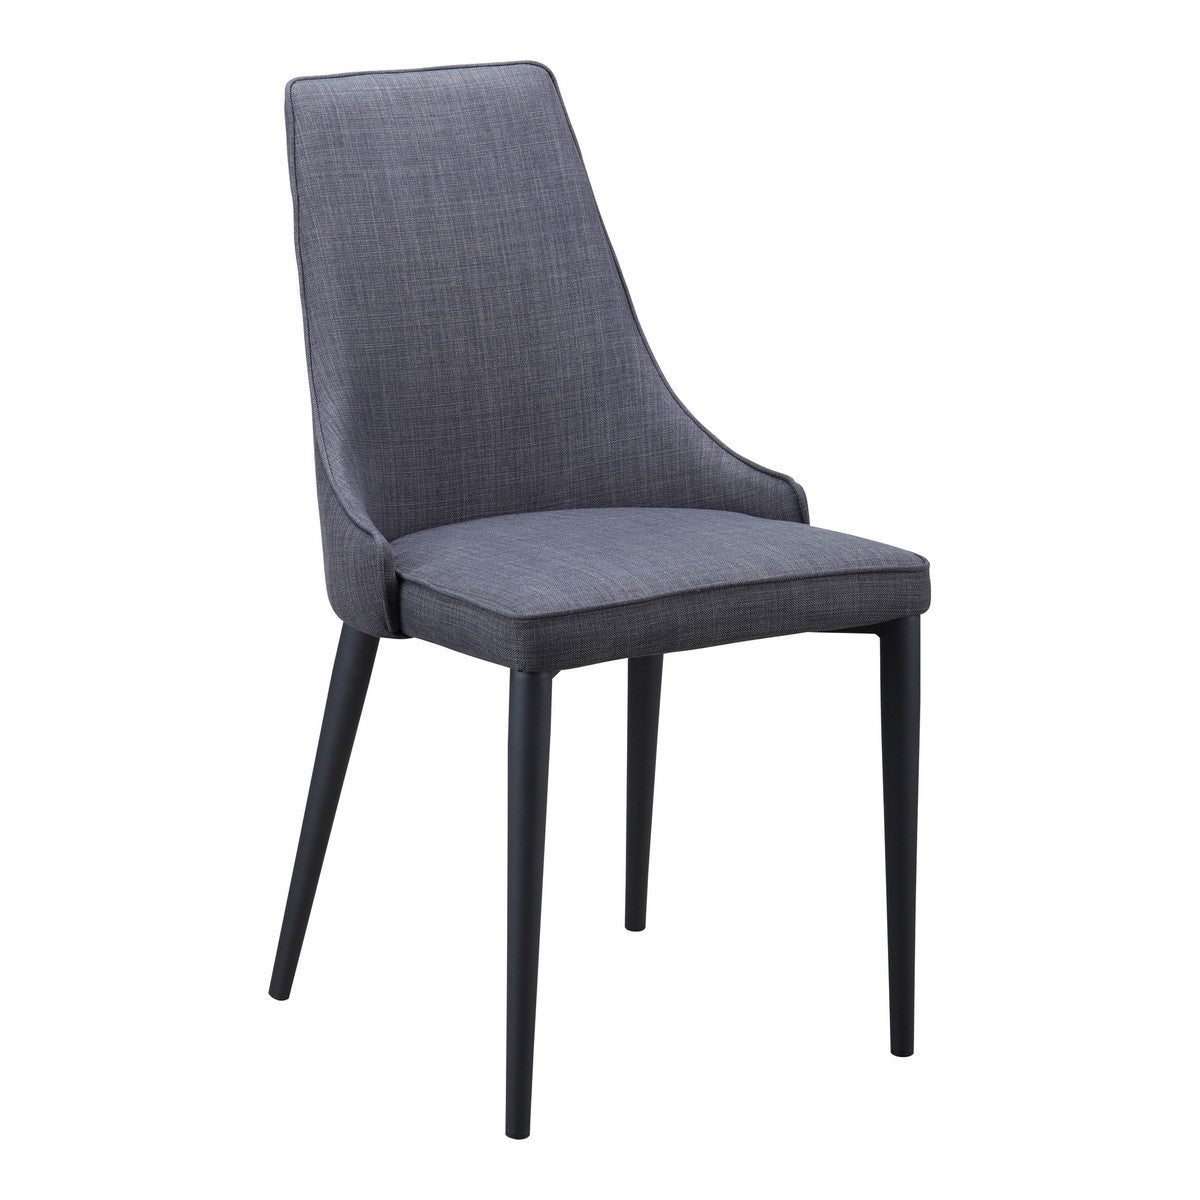 Moe's Home Collection Hazel Dining Chair Dark Grey-Set of Two - HK-1003-25